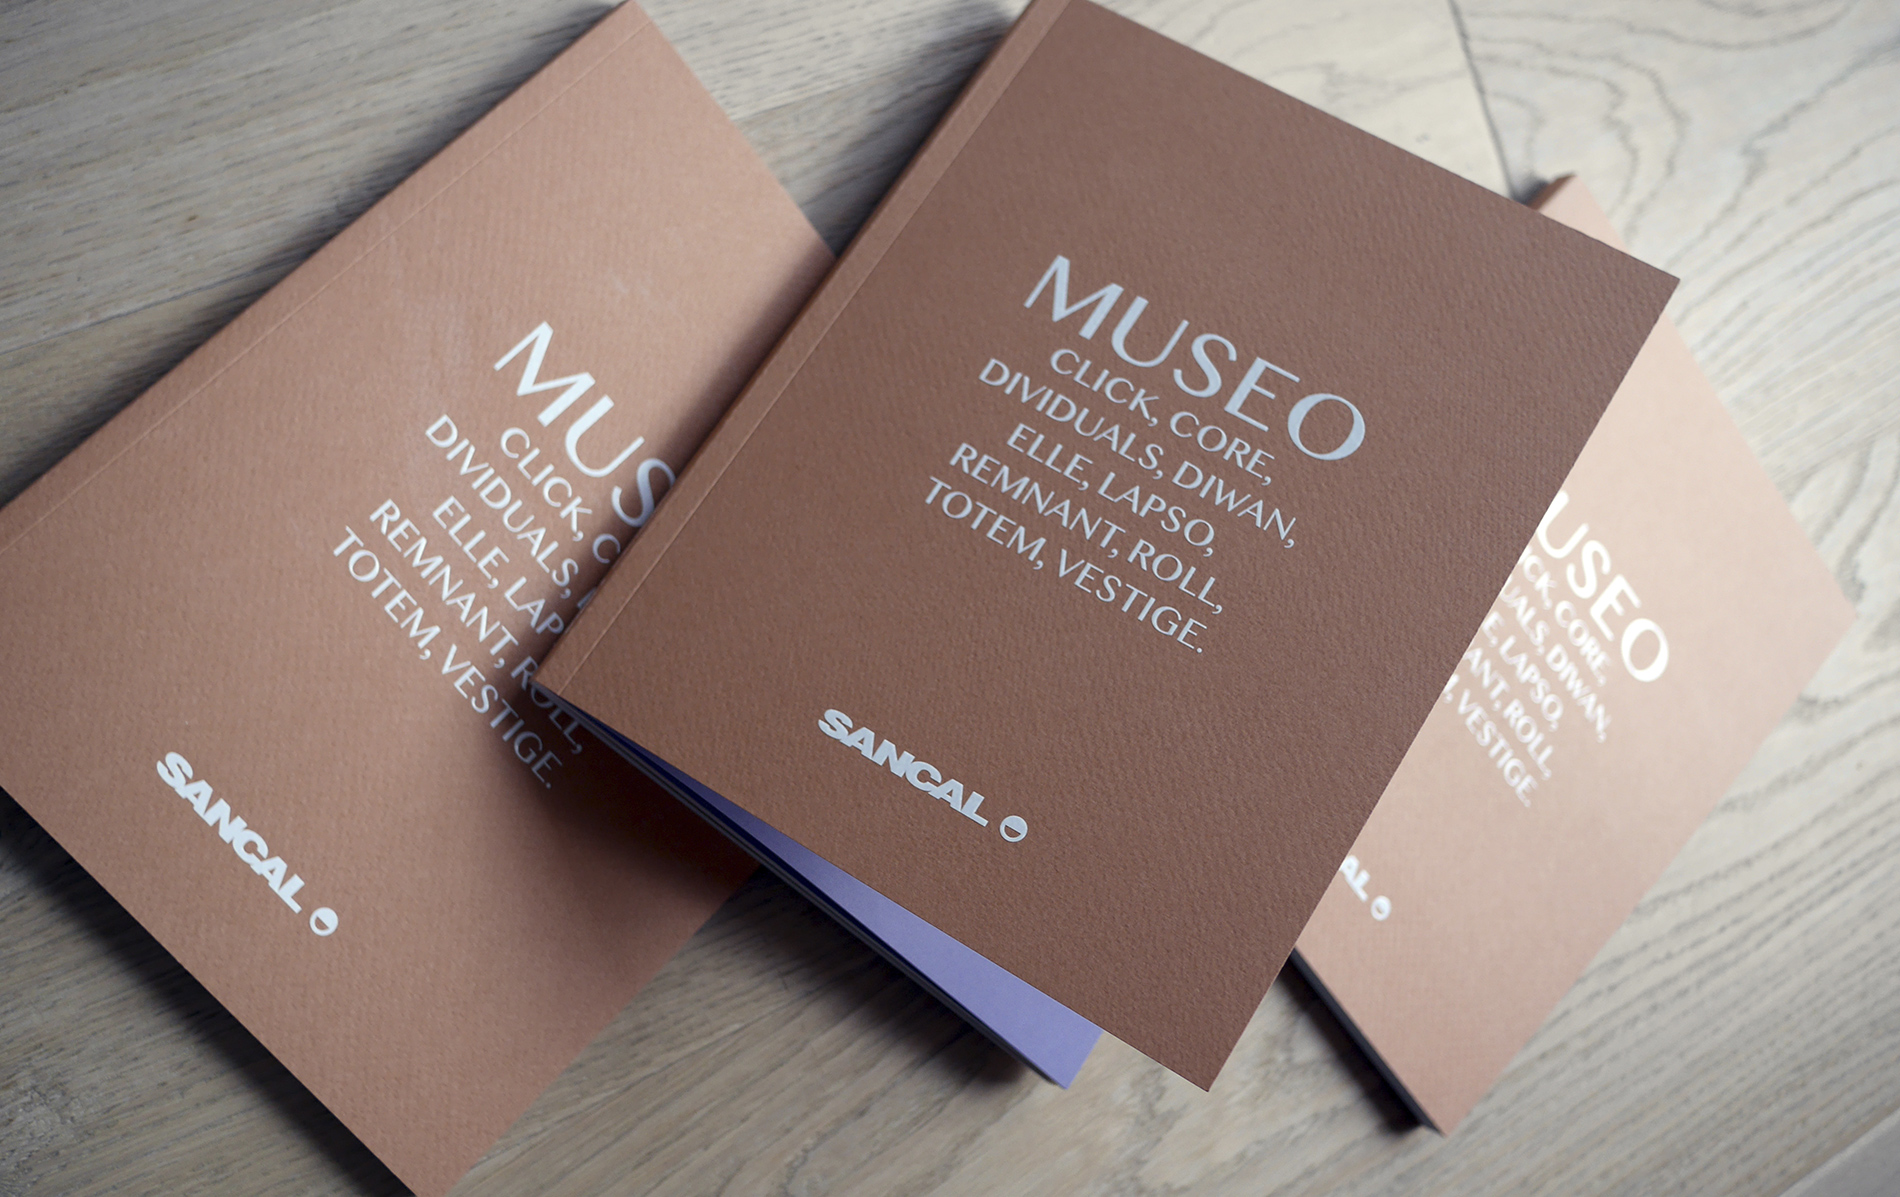 Museo Collection catalogue is available right now!